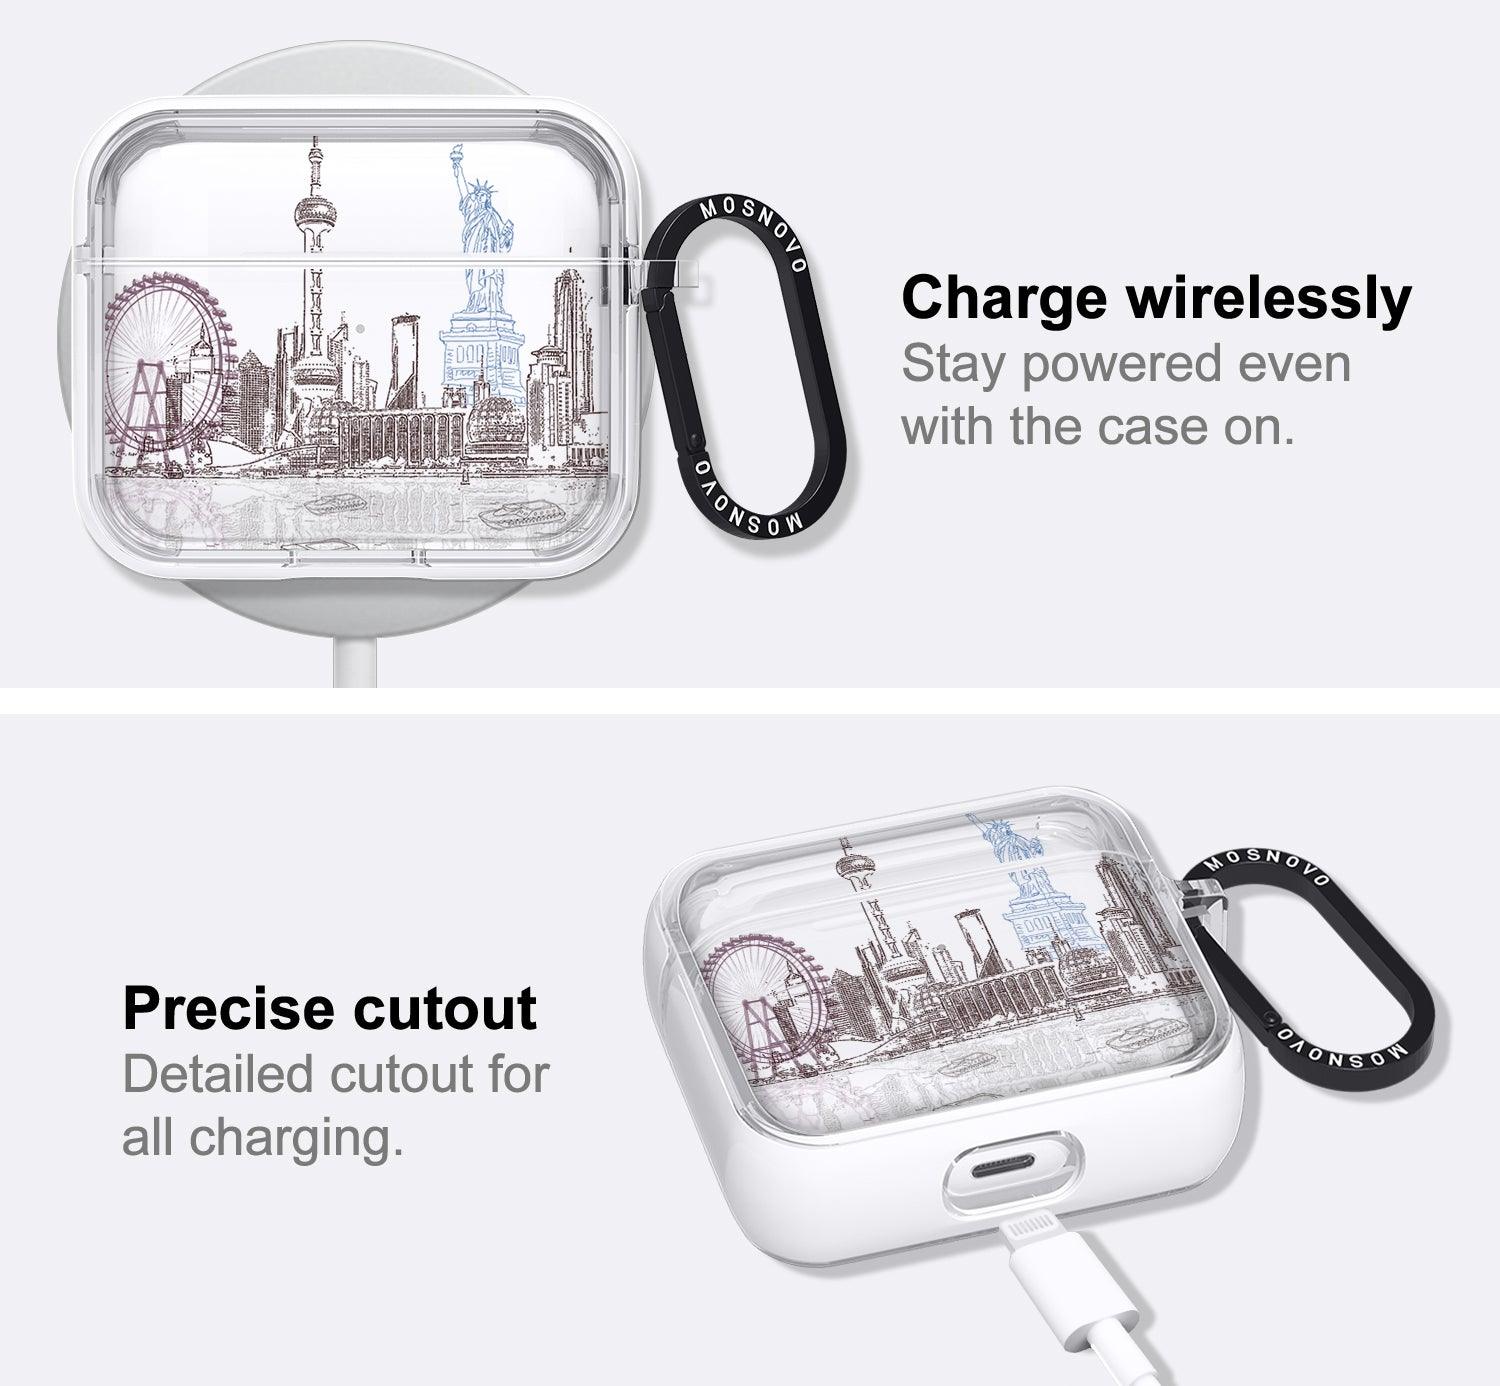 The World City AirPods 3 Case (3rd Generation) - MOSNOVO